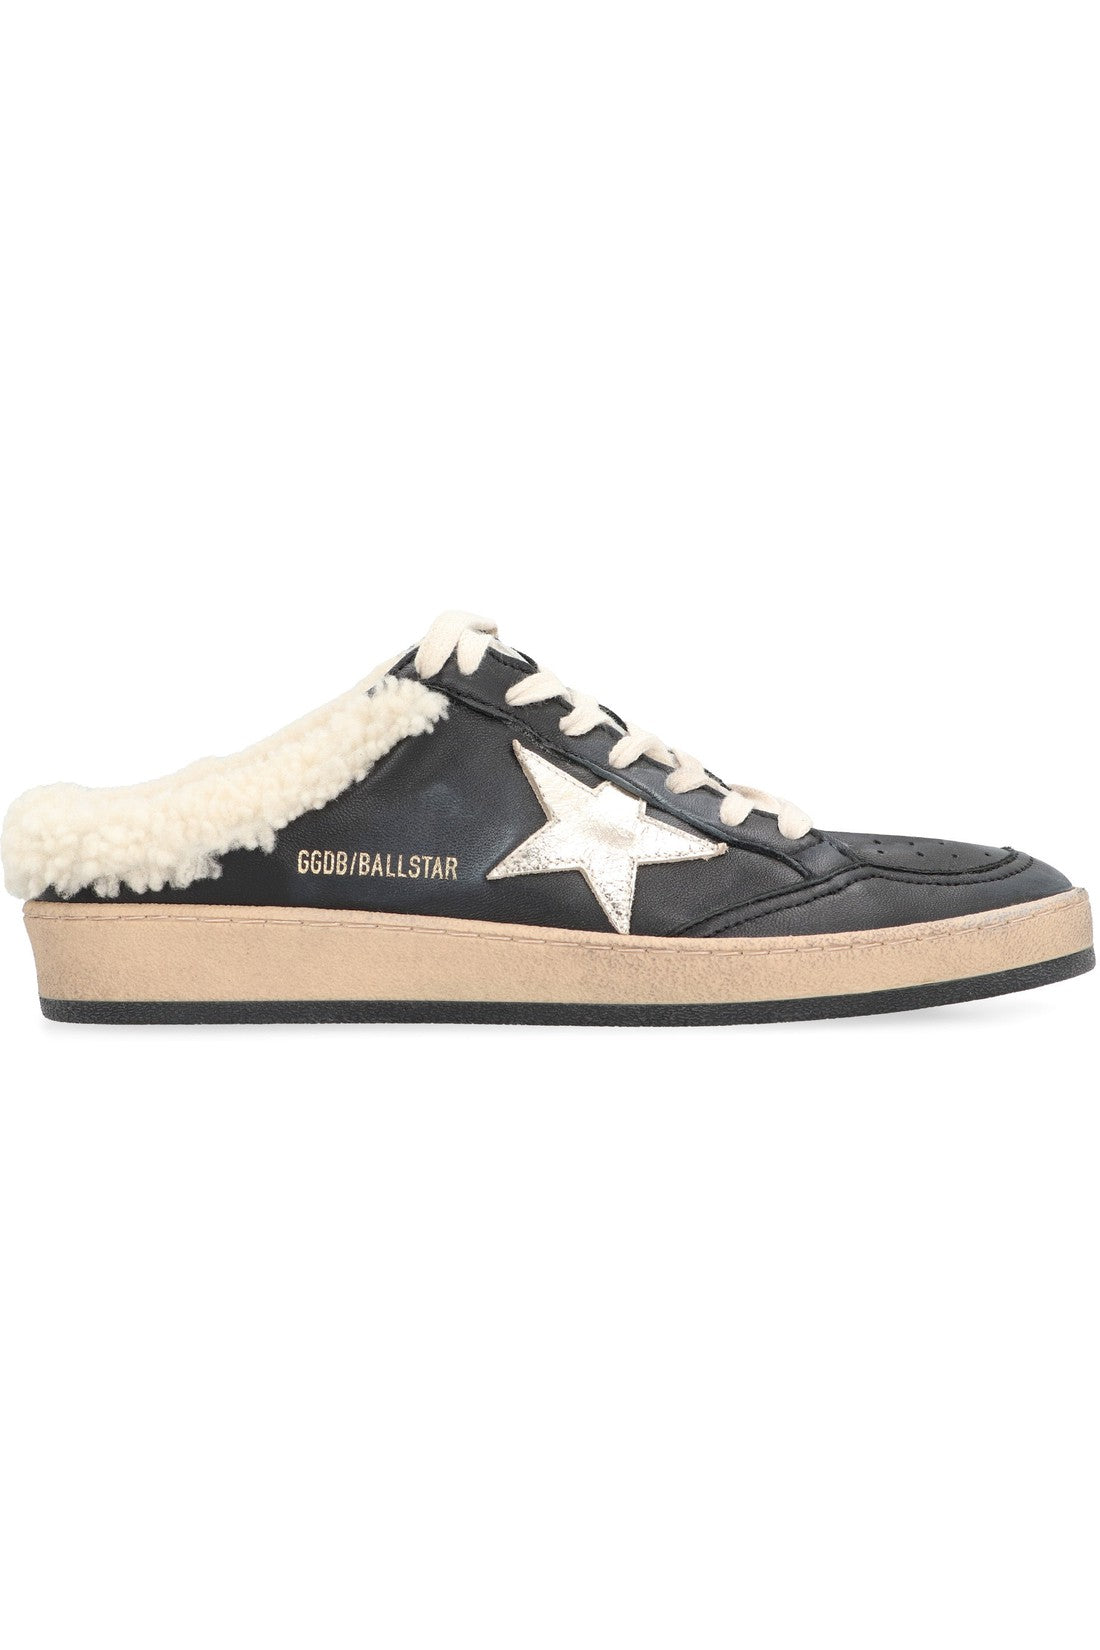 Golden Goose-OUTLET-SALE-Ball Star leather mules-ARCHIVIST